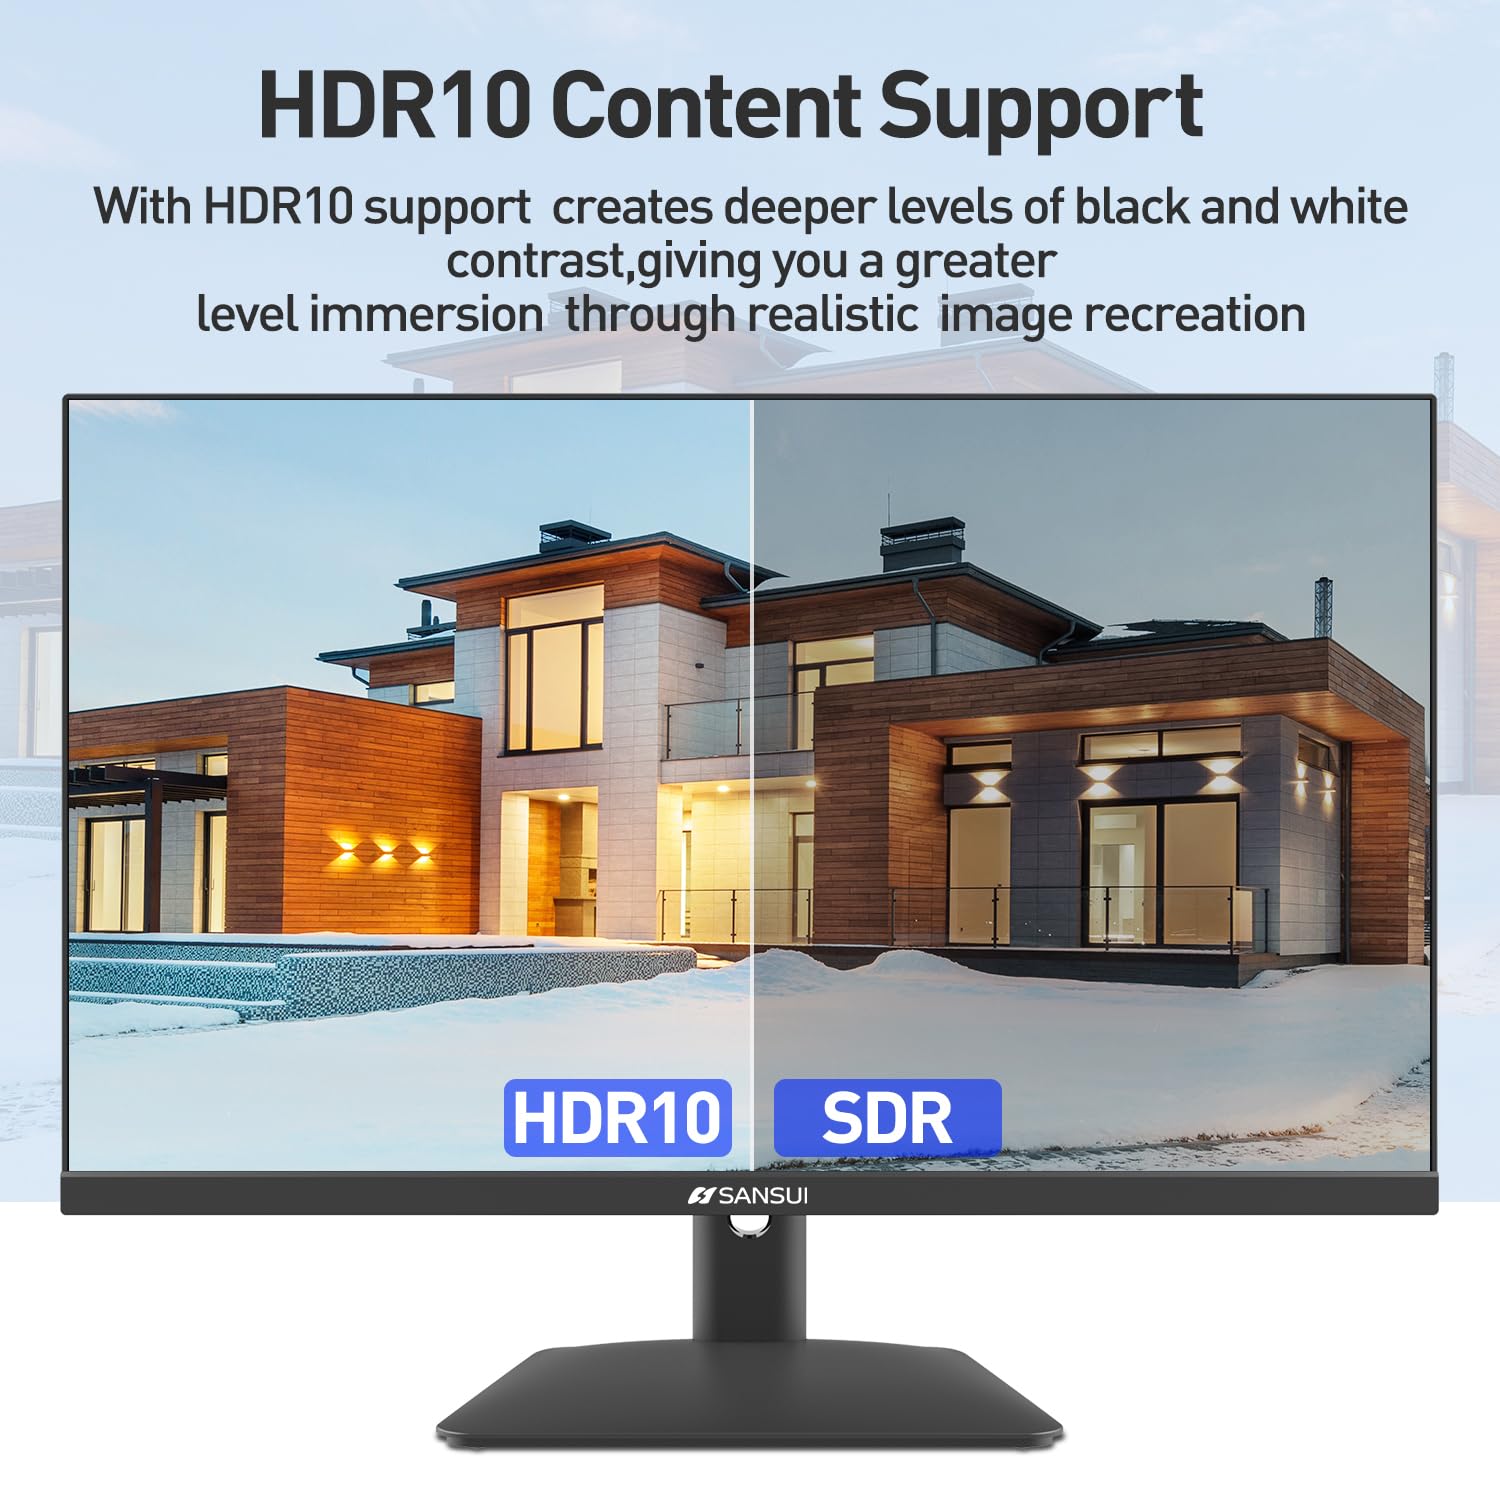 SANSUI Monitor 24 inch IPS FHD 1080P 75HZ HDR10 Computer Monitor with HDMI,VGA,DP Ports Frameless/Eye Care/Ergonomic Tilt/Speakers Built-in(ES-24X5A HDMI Cable Included)